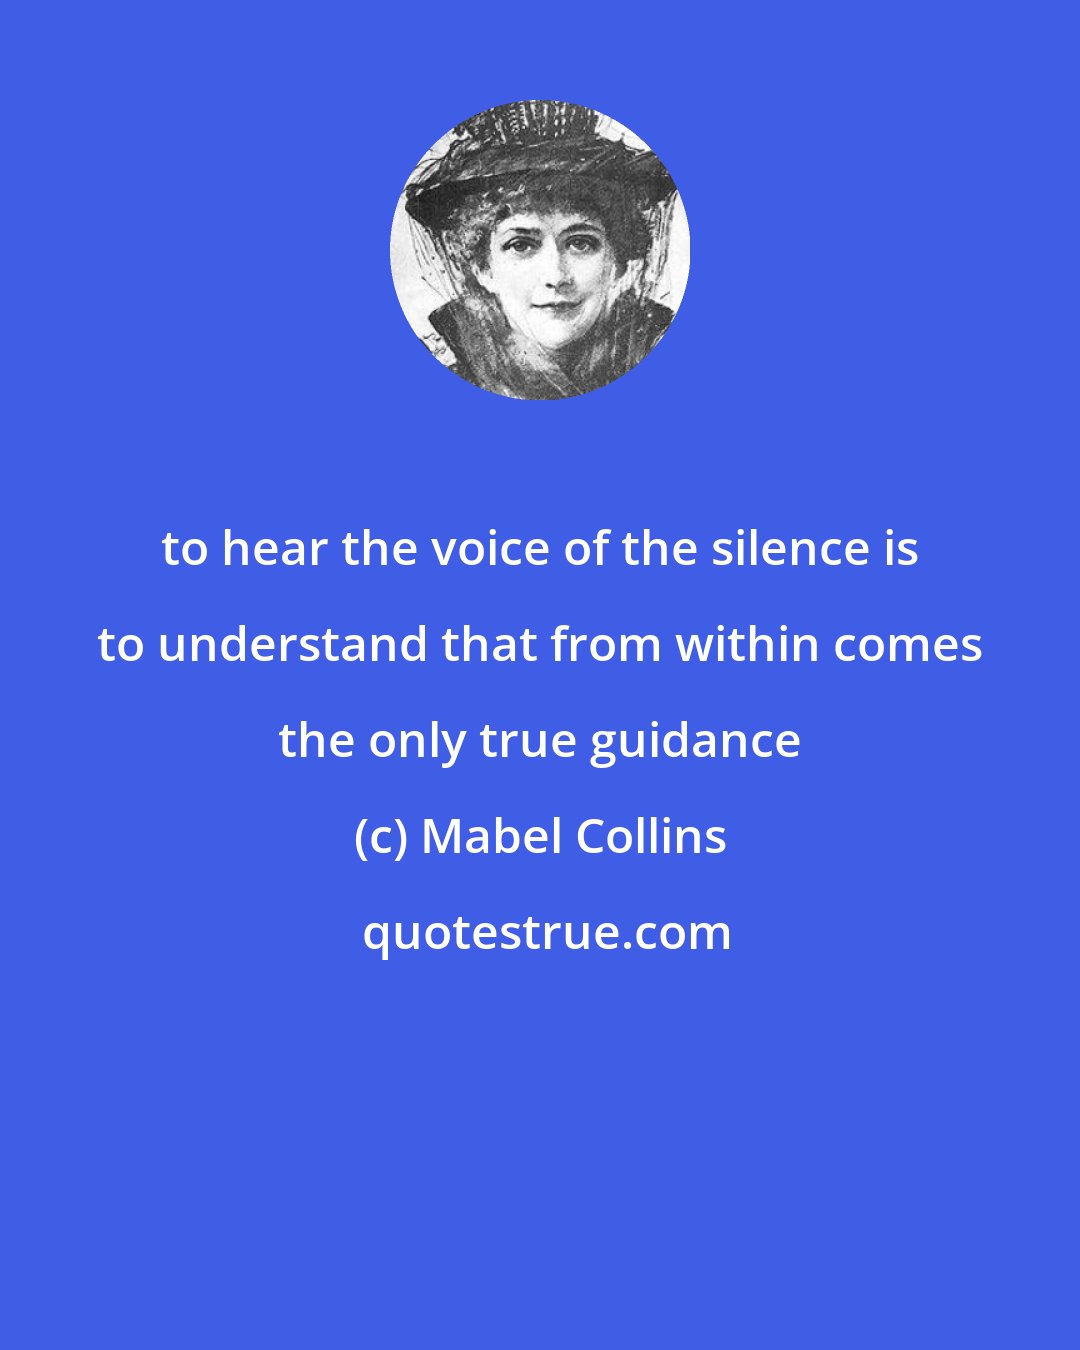 Mabel Collins: to hear the voice of the silence is to understand that from within comes the only true guidance